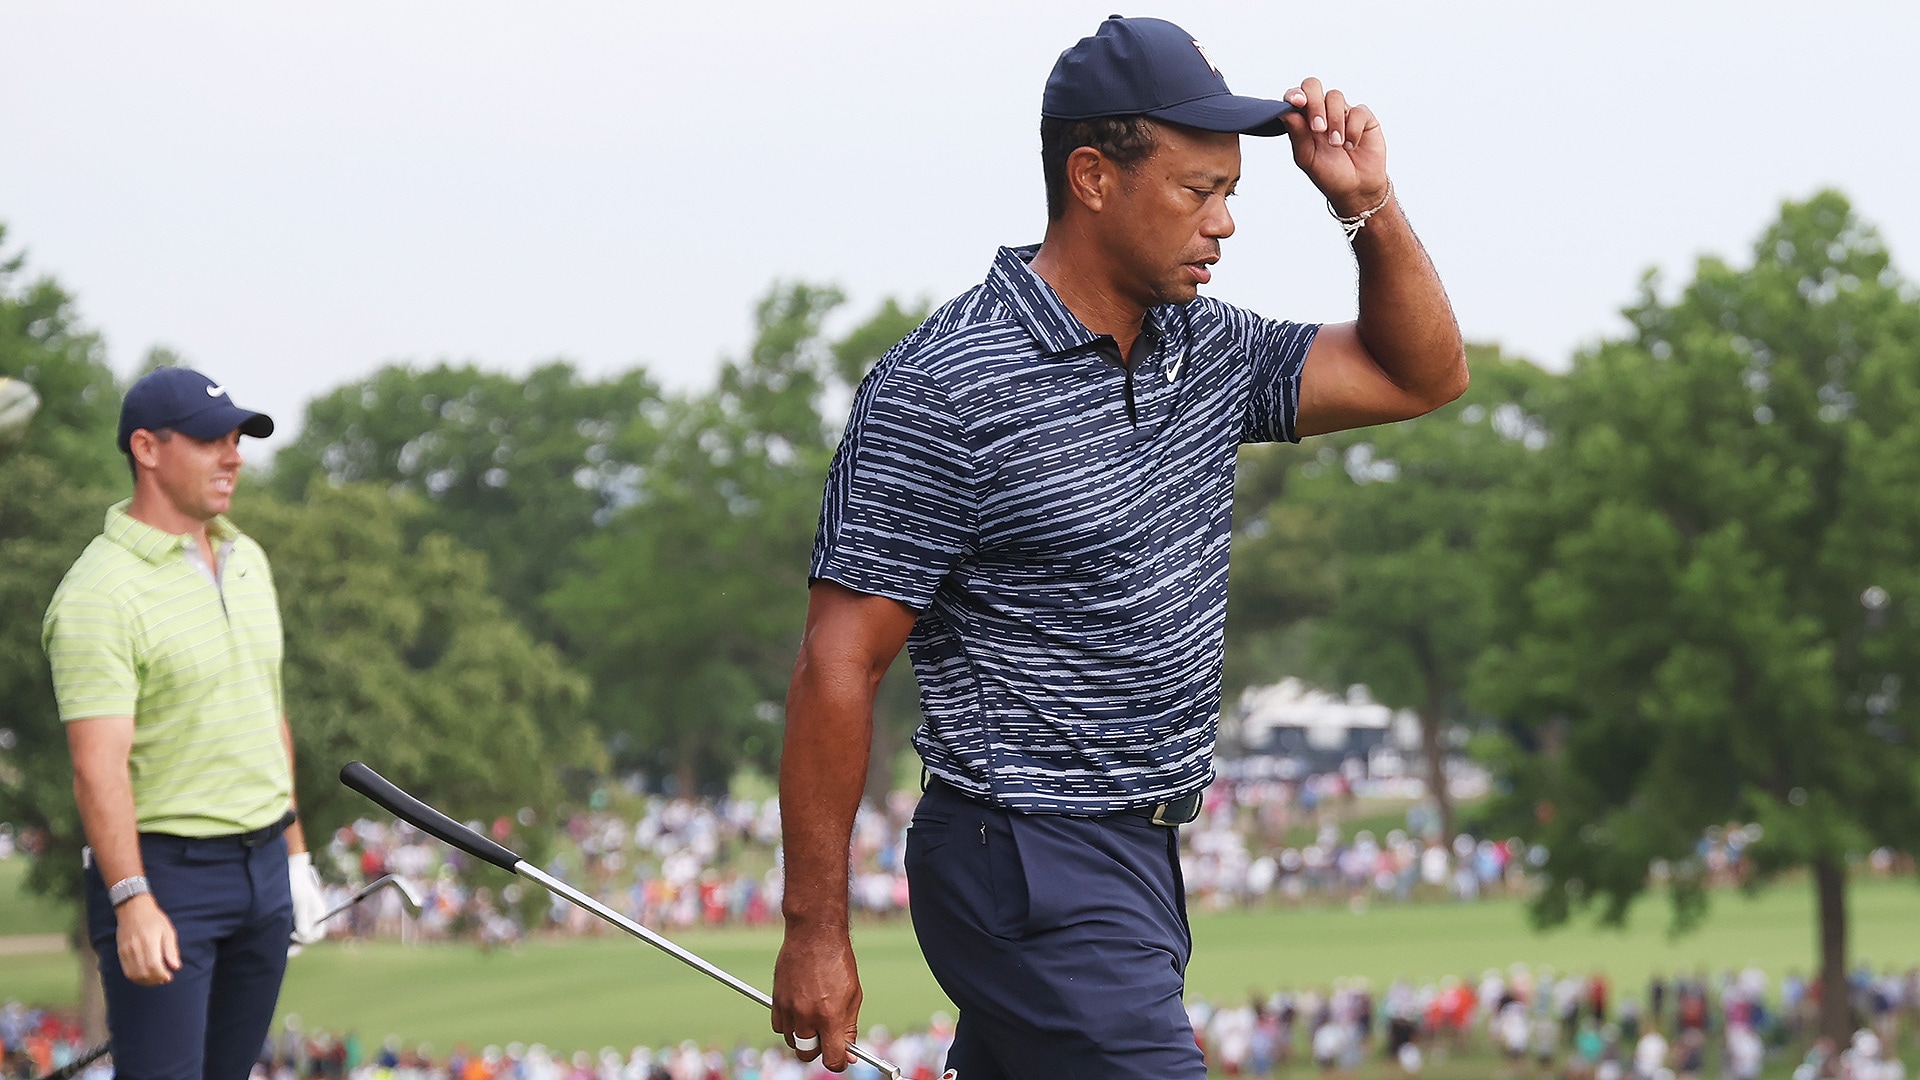 Tiger Woods again wins the Player Impact Program, according to Rory McIlroy